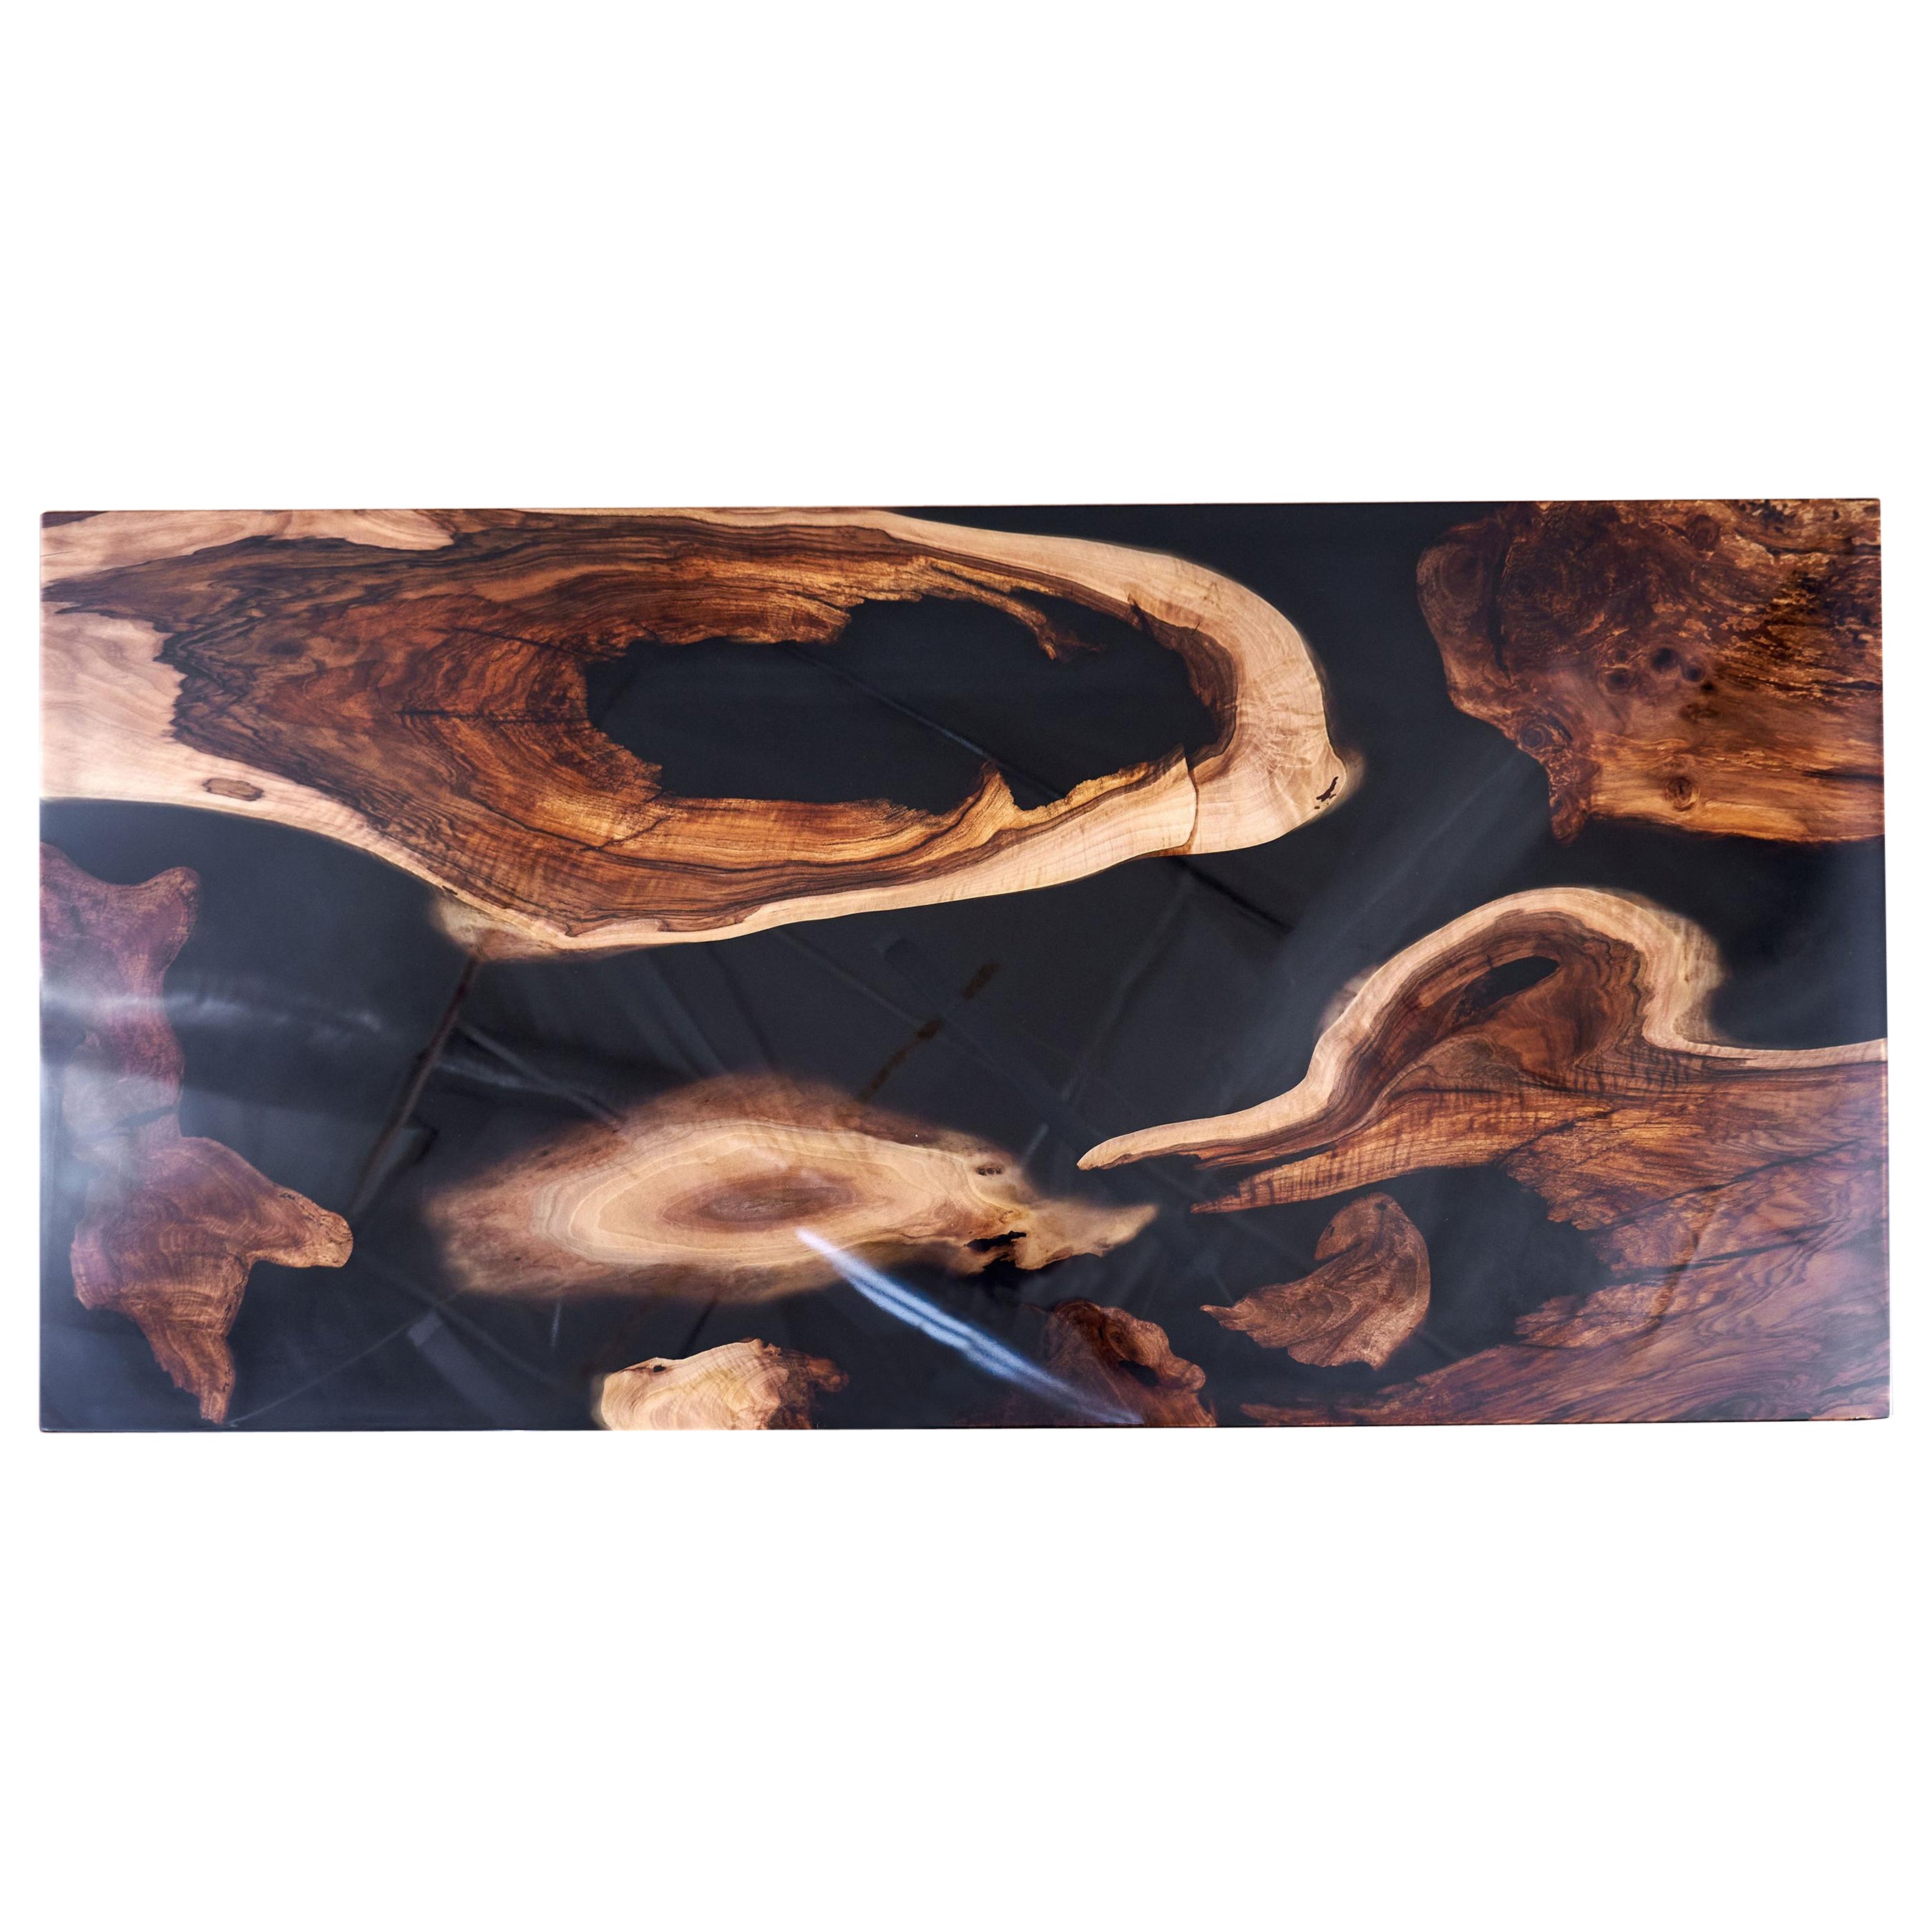 Gorgeous old walnut roots. Authentic texture and character of the walnut vein. Hand leveled, cleaned and filled with a black opaque resin that blends perfectly with the nut roots. Extra layer of epoxy on top for permanent use. Hard lacquer finish